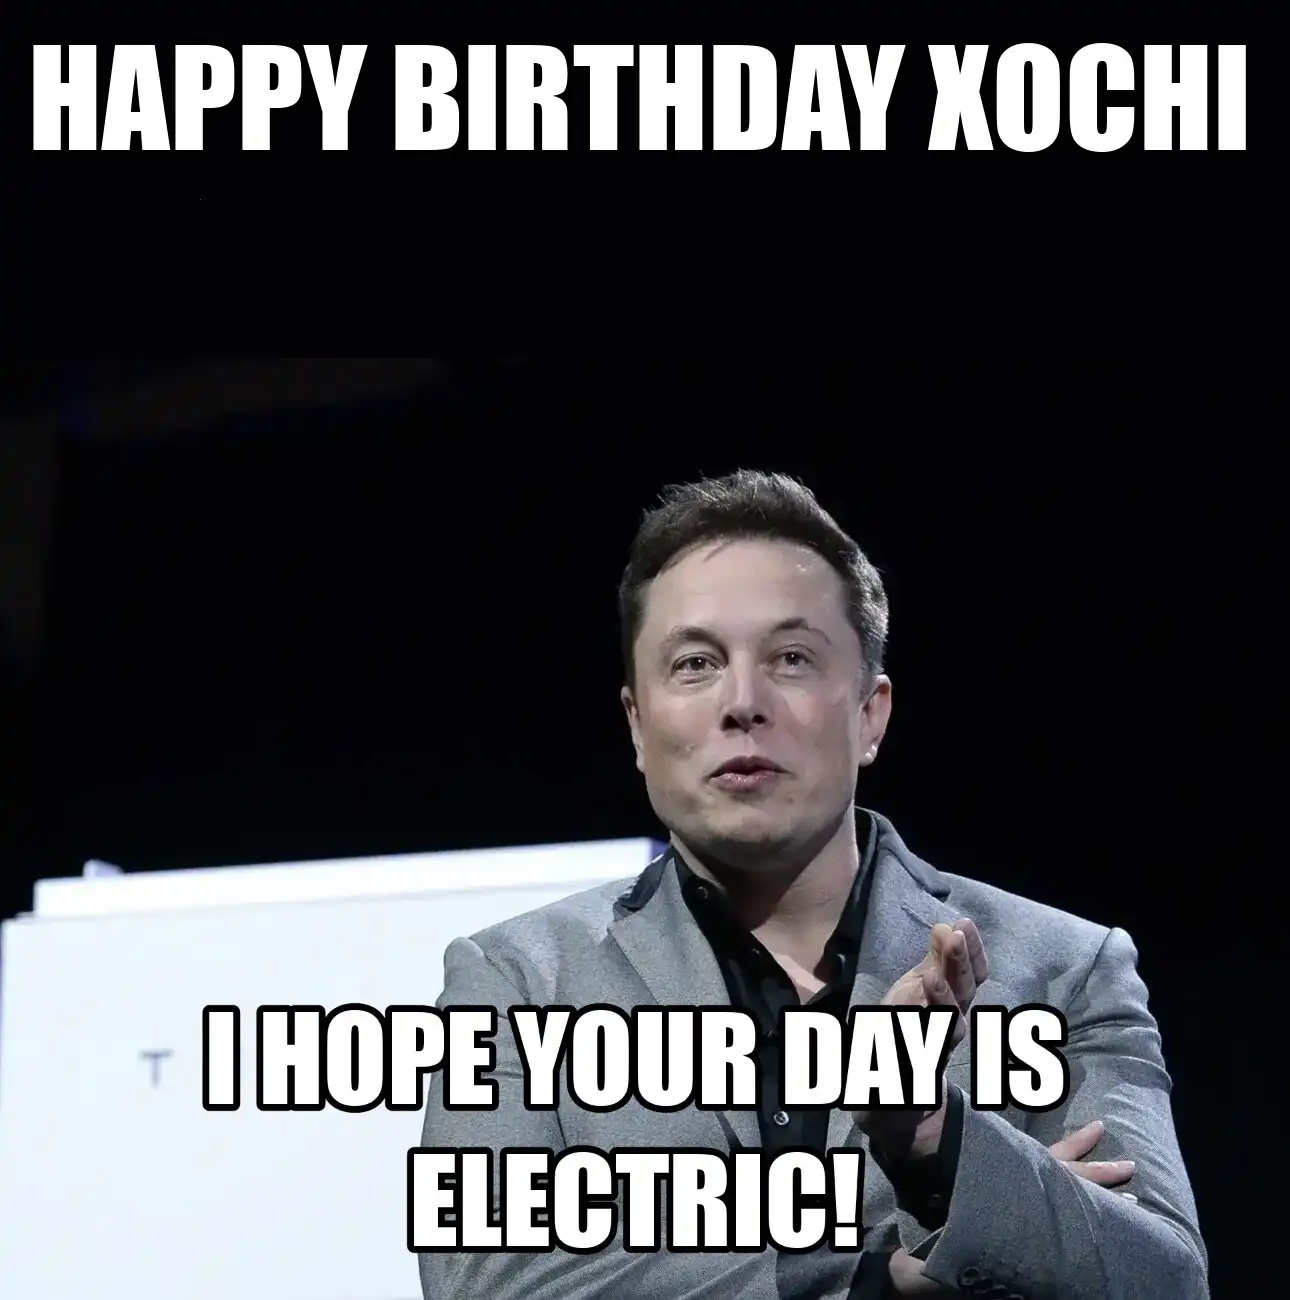 Happy Birthday Xochi I Hope Your Day Is Electric Meme